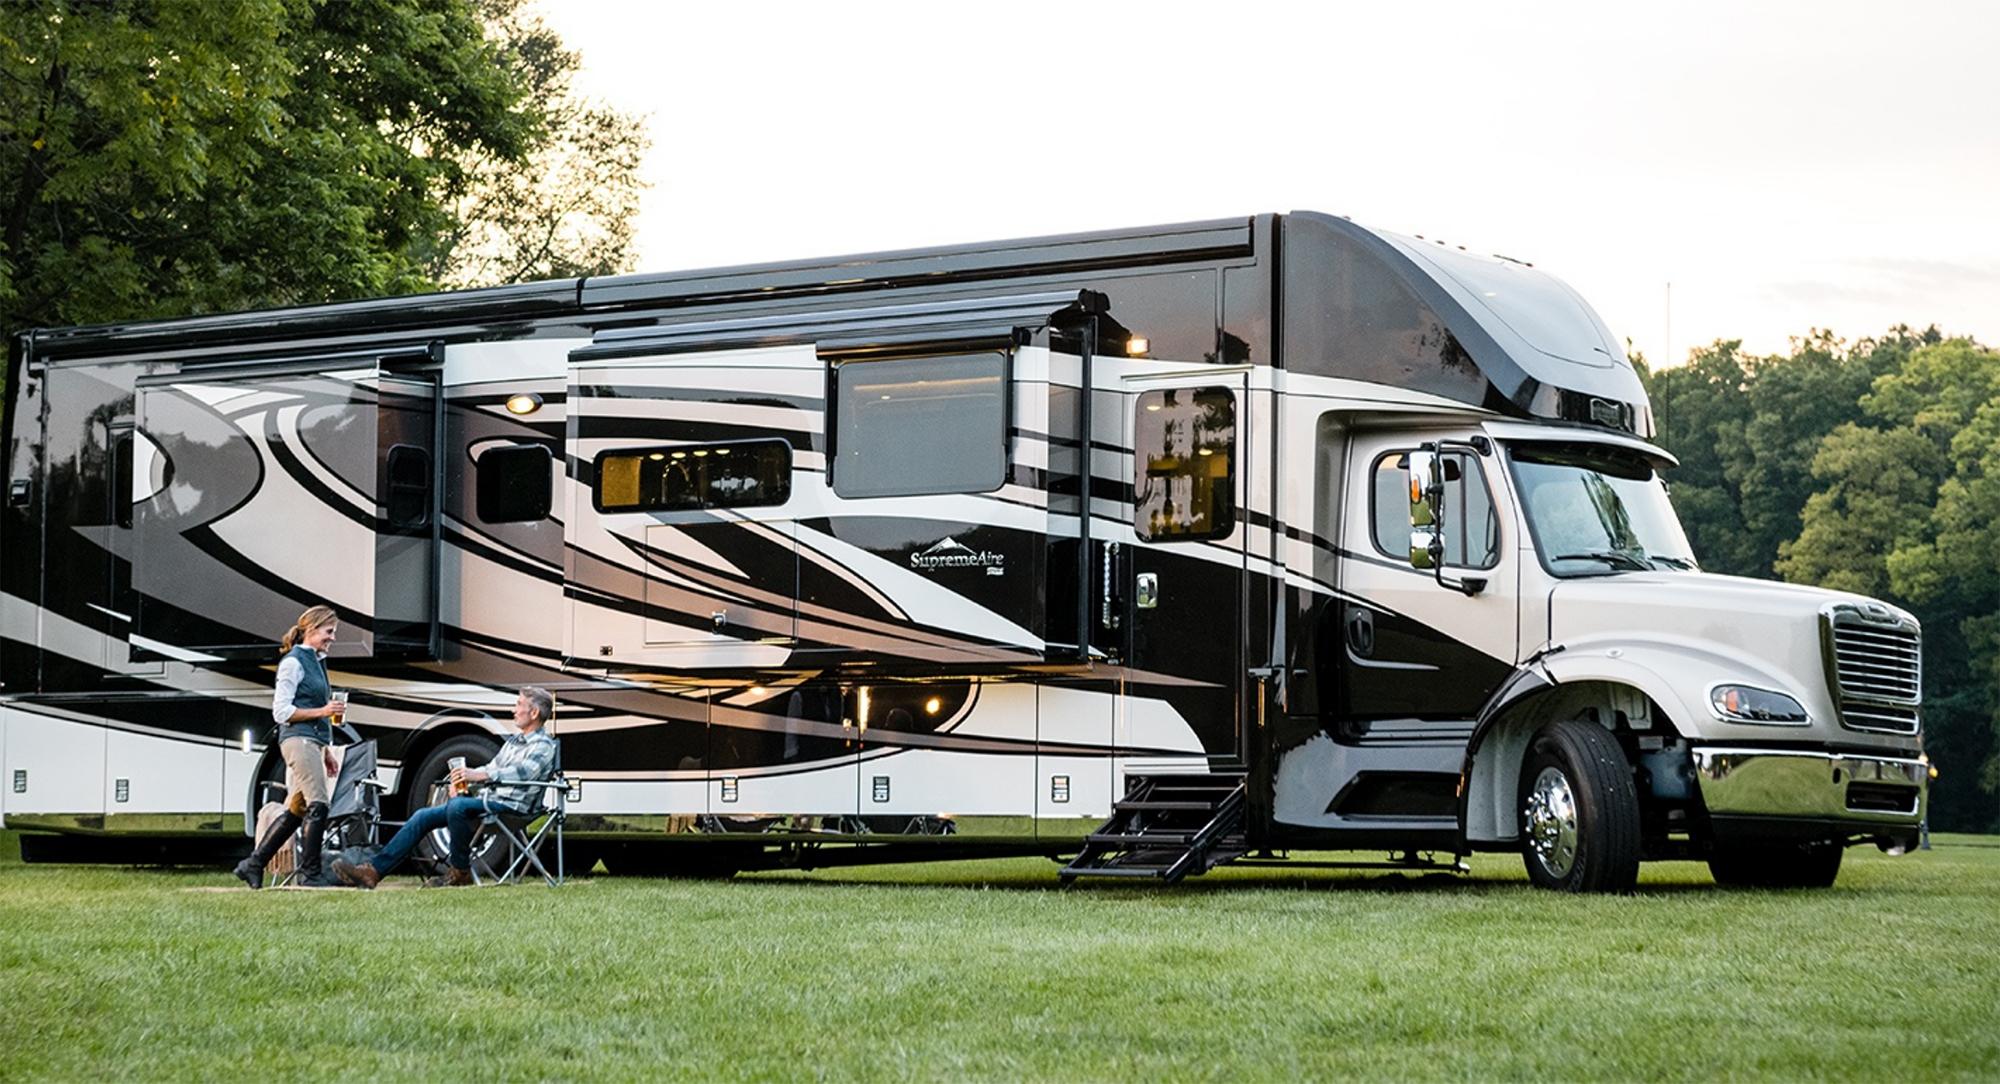 4. Pre-Owned RVs for Sale in Texas - wide 5